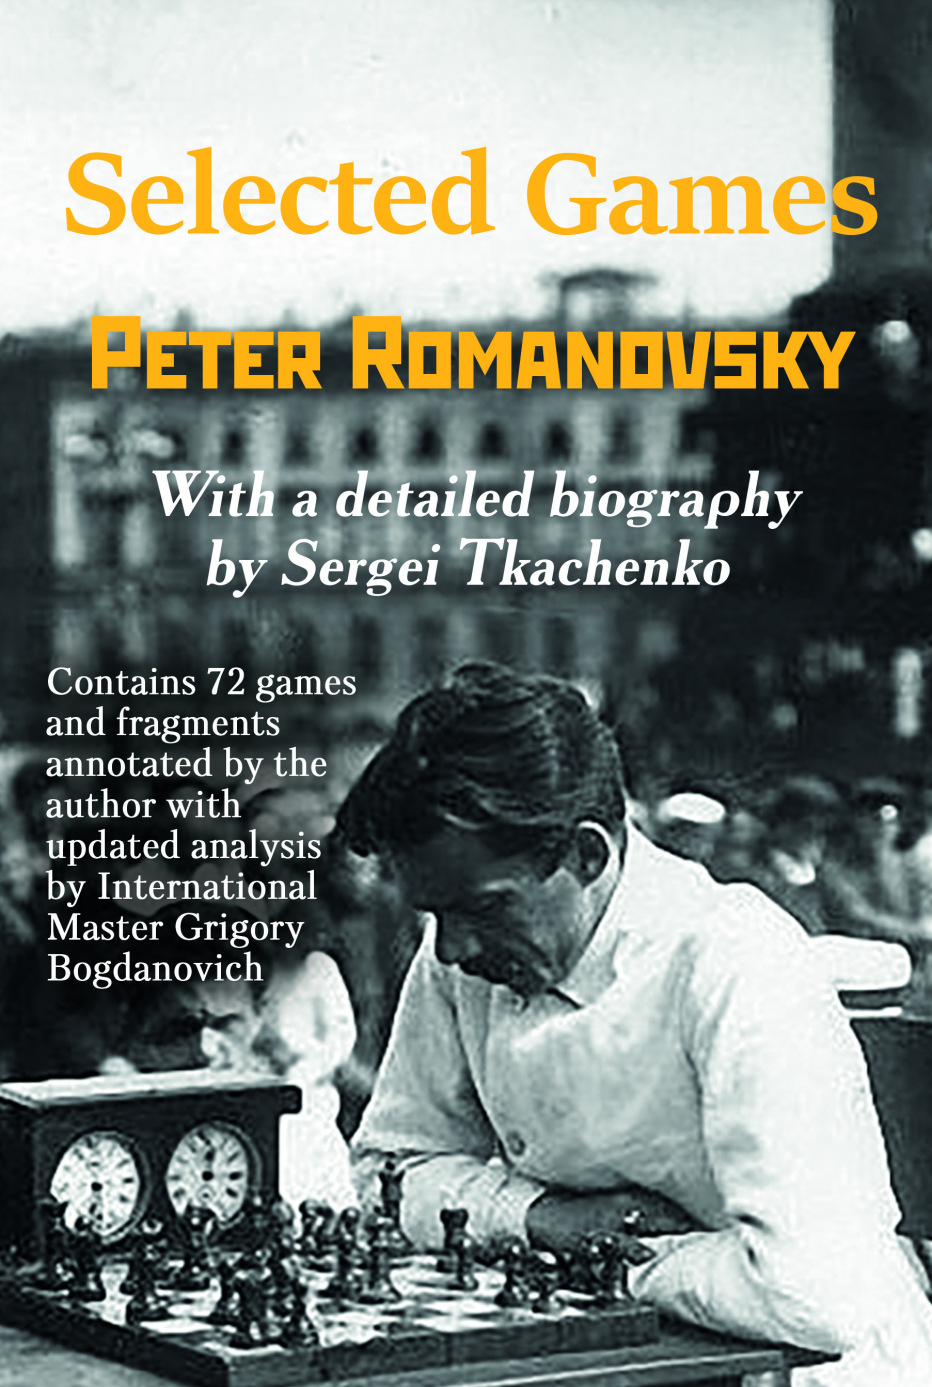 New book tells the tale of the love story between Sally Landau and her  chess pro husband Tal